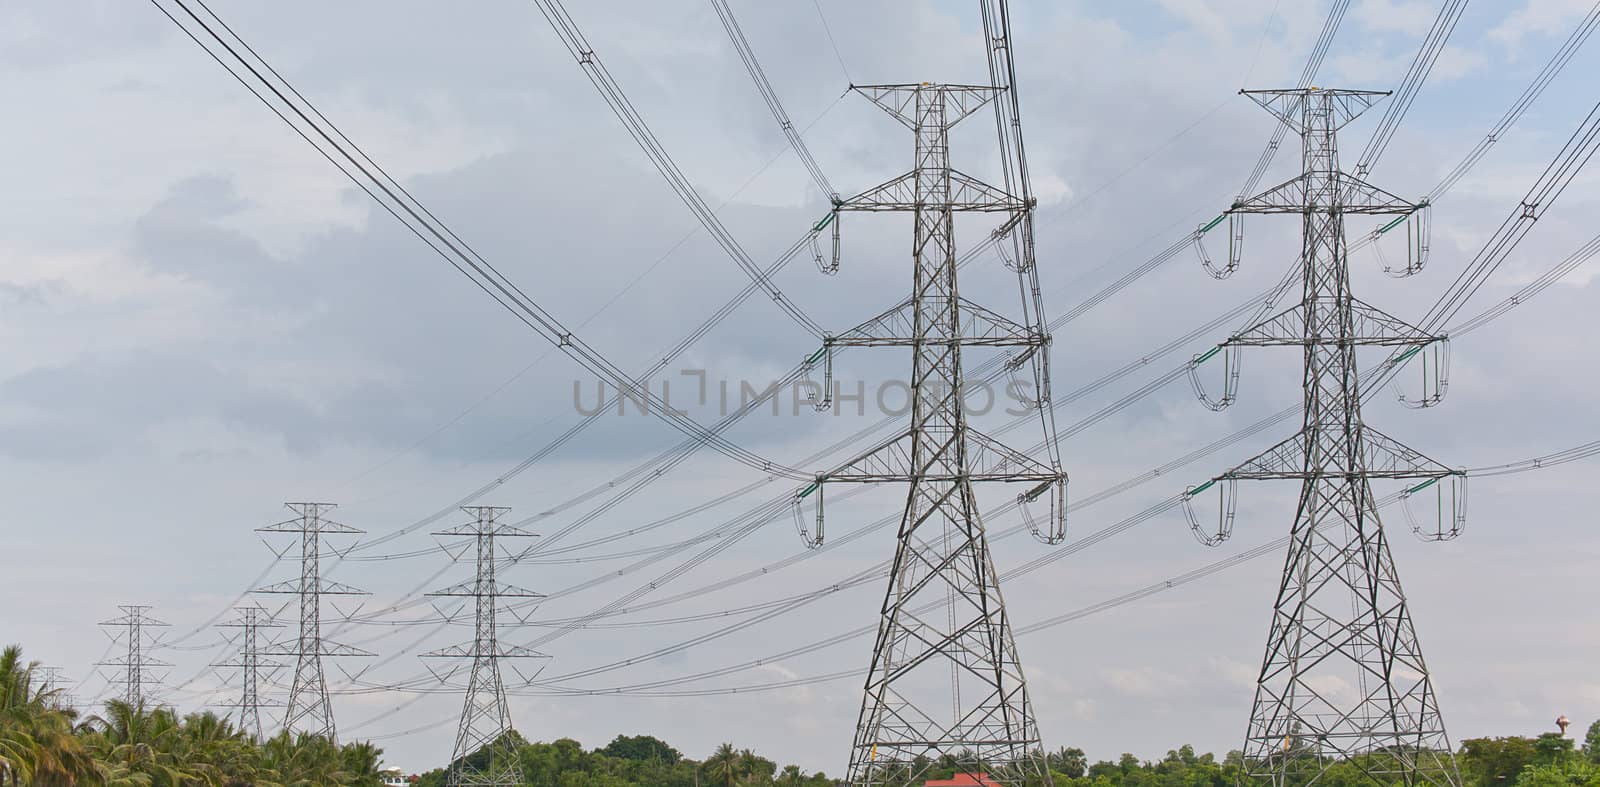 Electricity, twin High voltage power pole